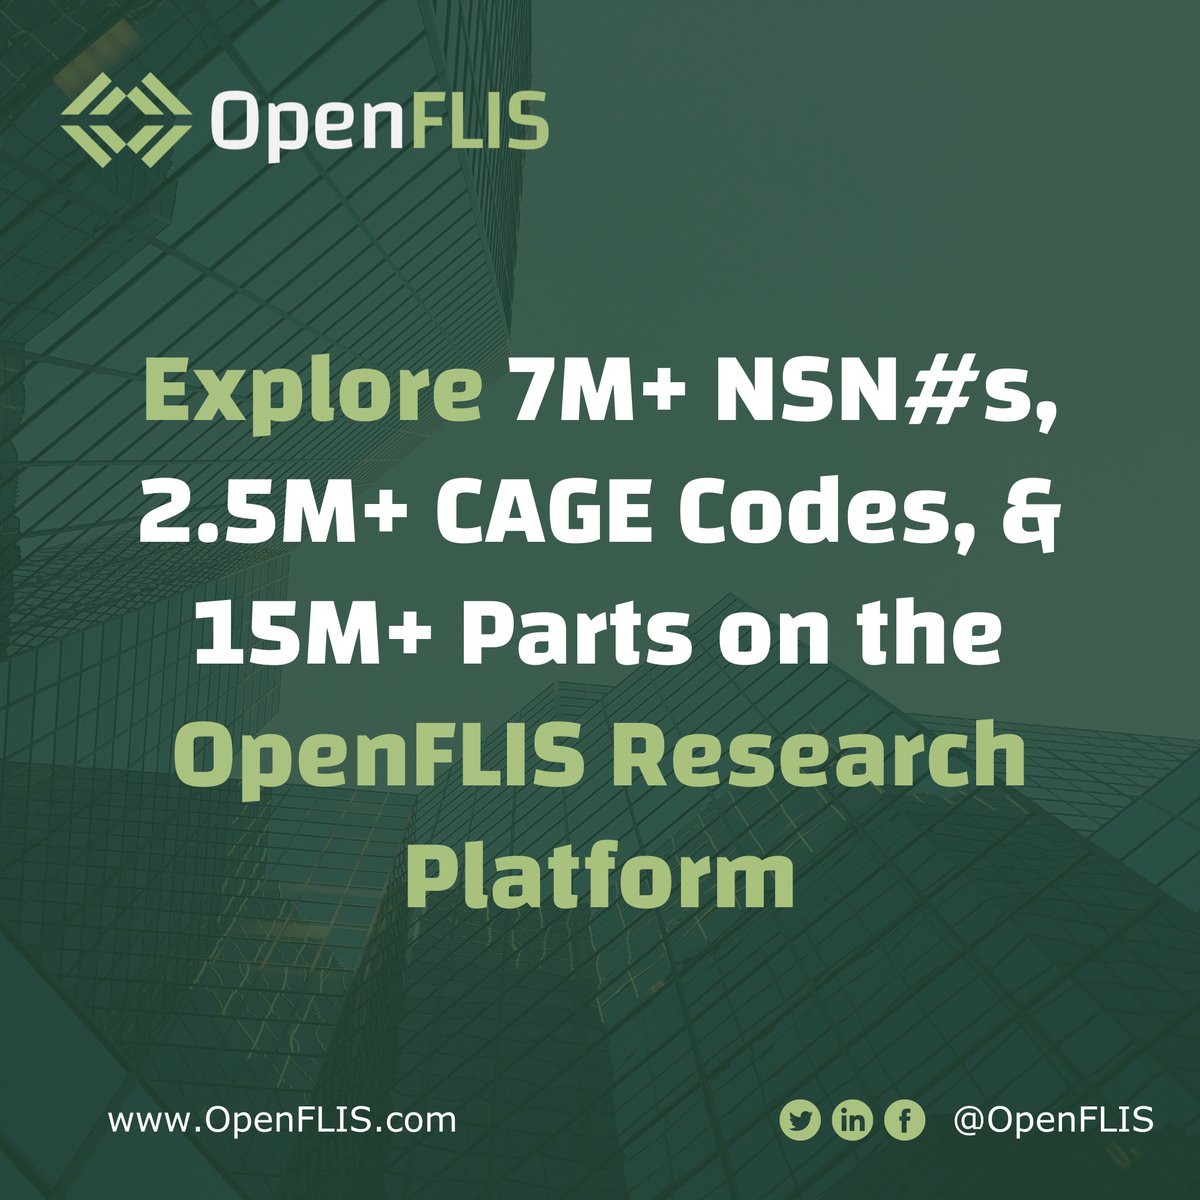 Attention all procurement professionals. OpenFLIS API is your ultimate solution for accessing critical data on NSN#'s and CAGE Codes. Our cutting-edge API integration will provide you with the tools you need to stay ahead of the competition and gain a competitive edge in the g...